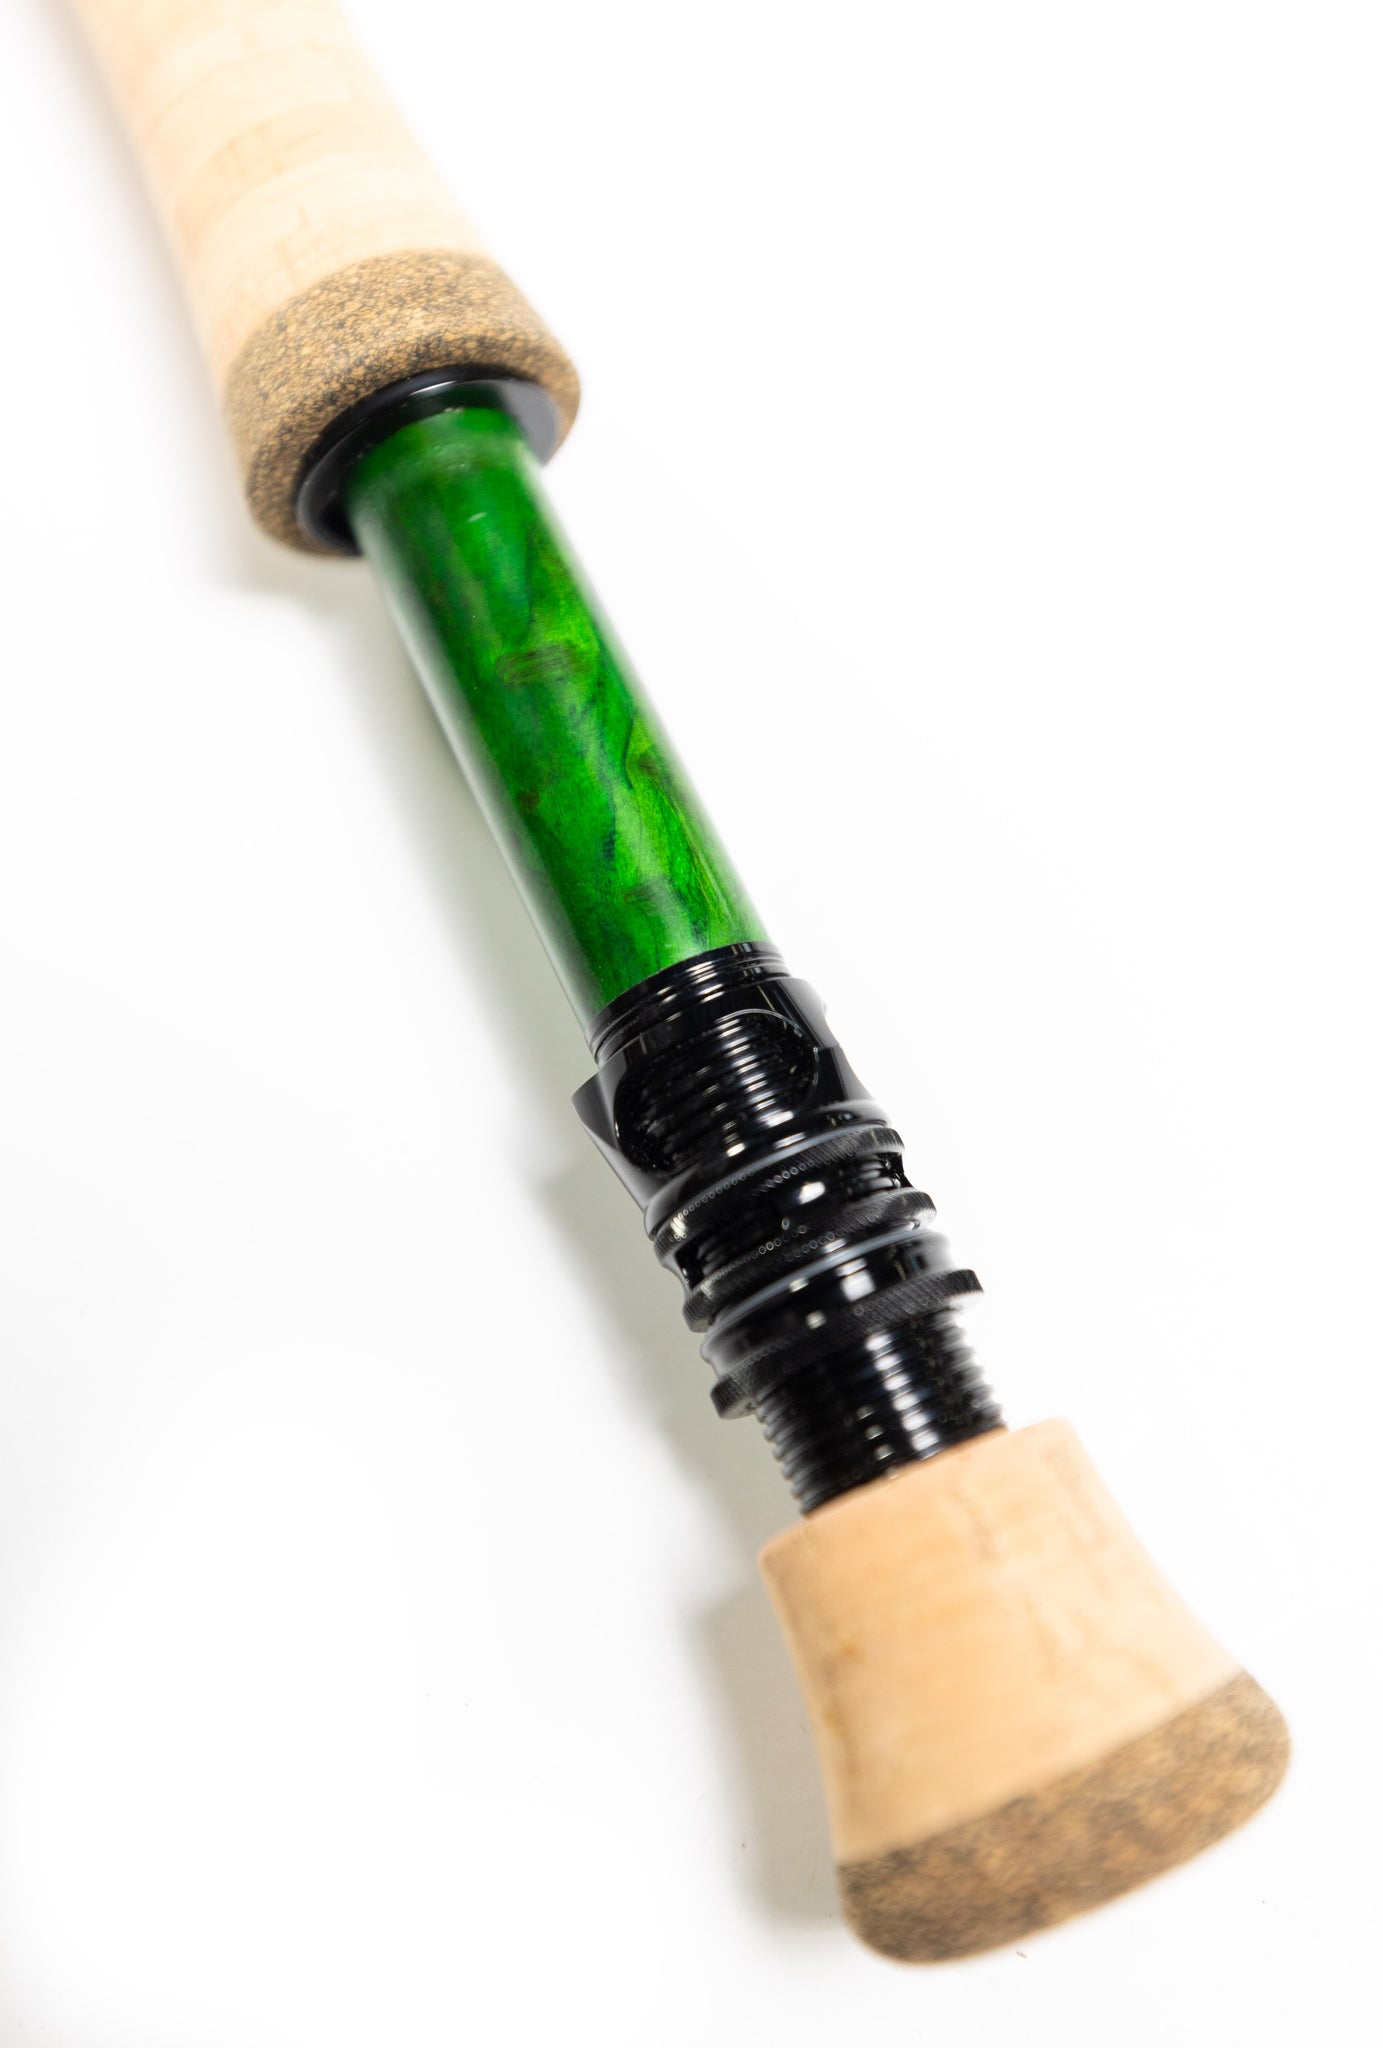 Midnight Special II - 7wt - 9' - Speckled Emerald